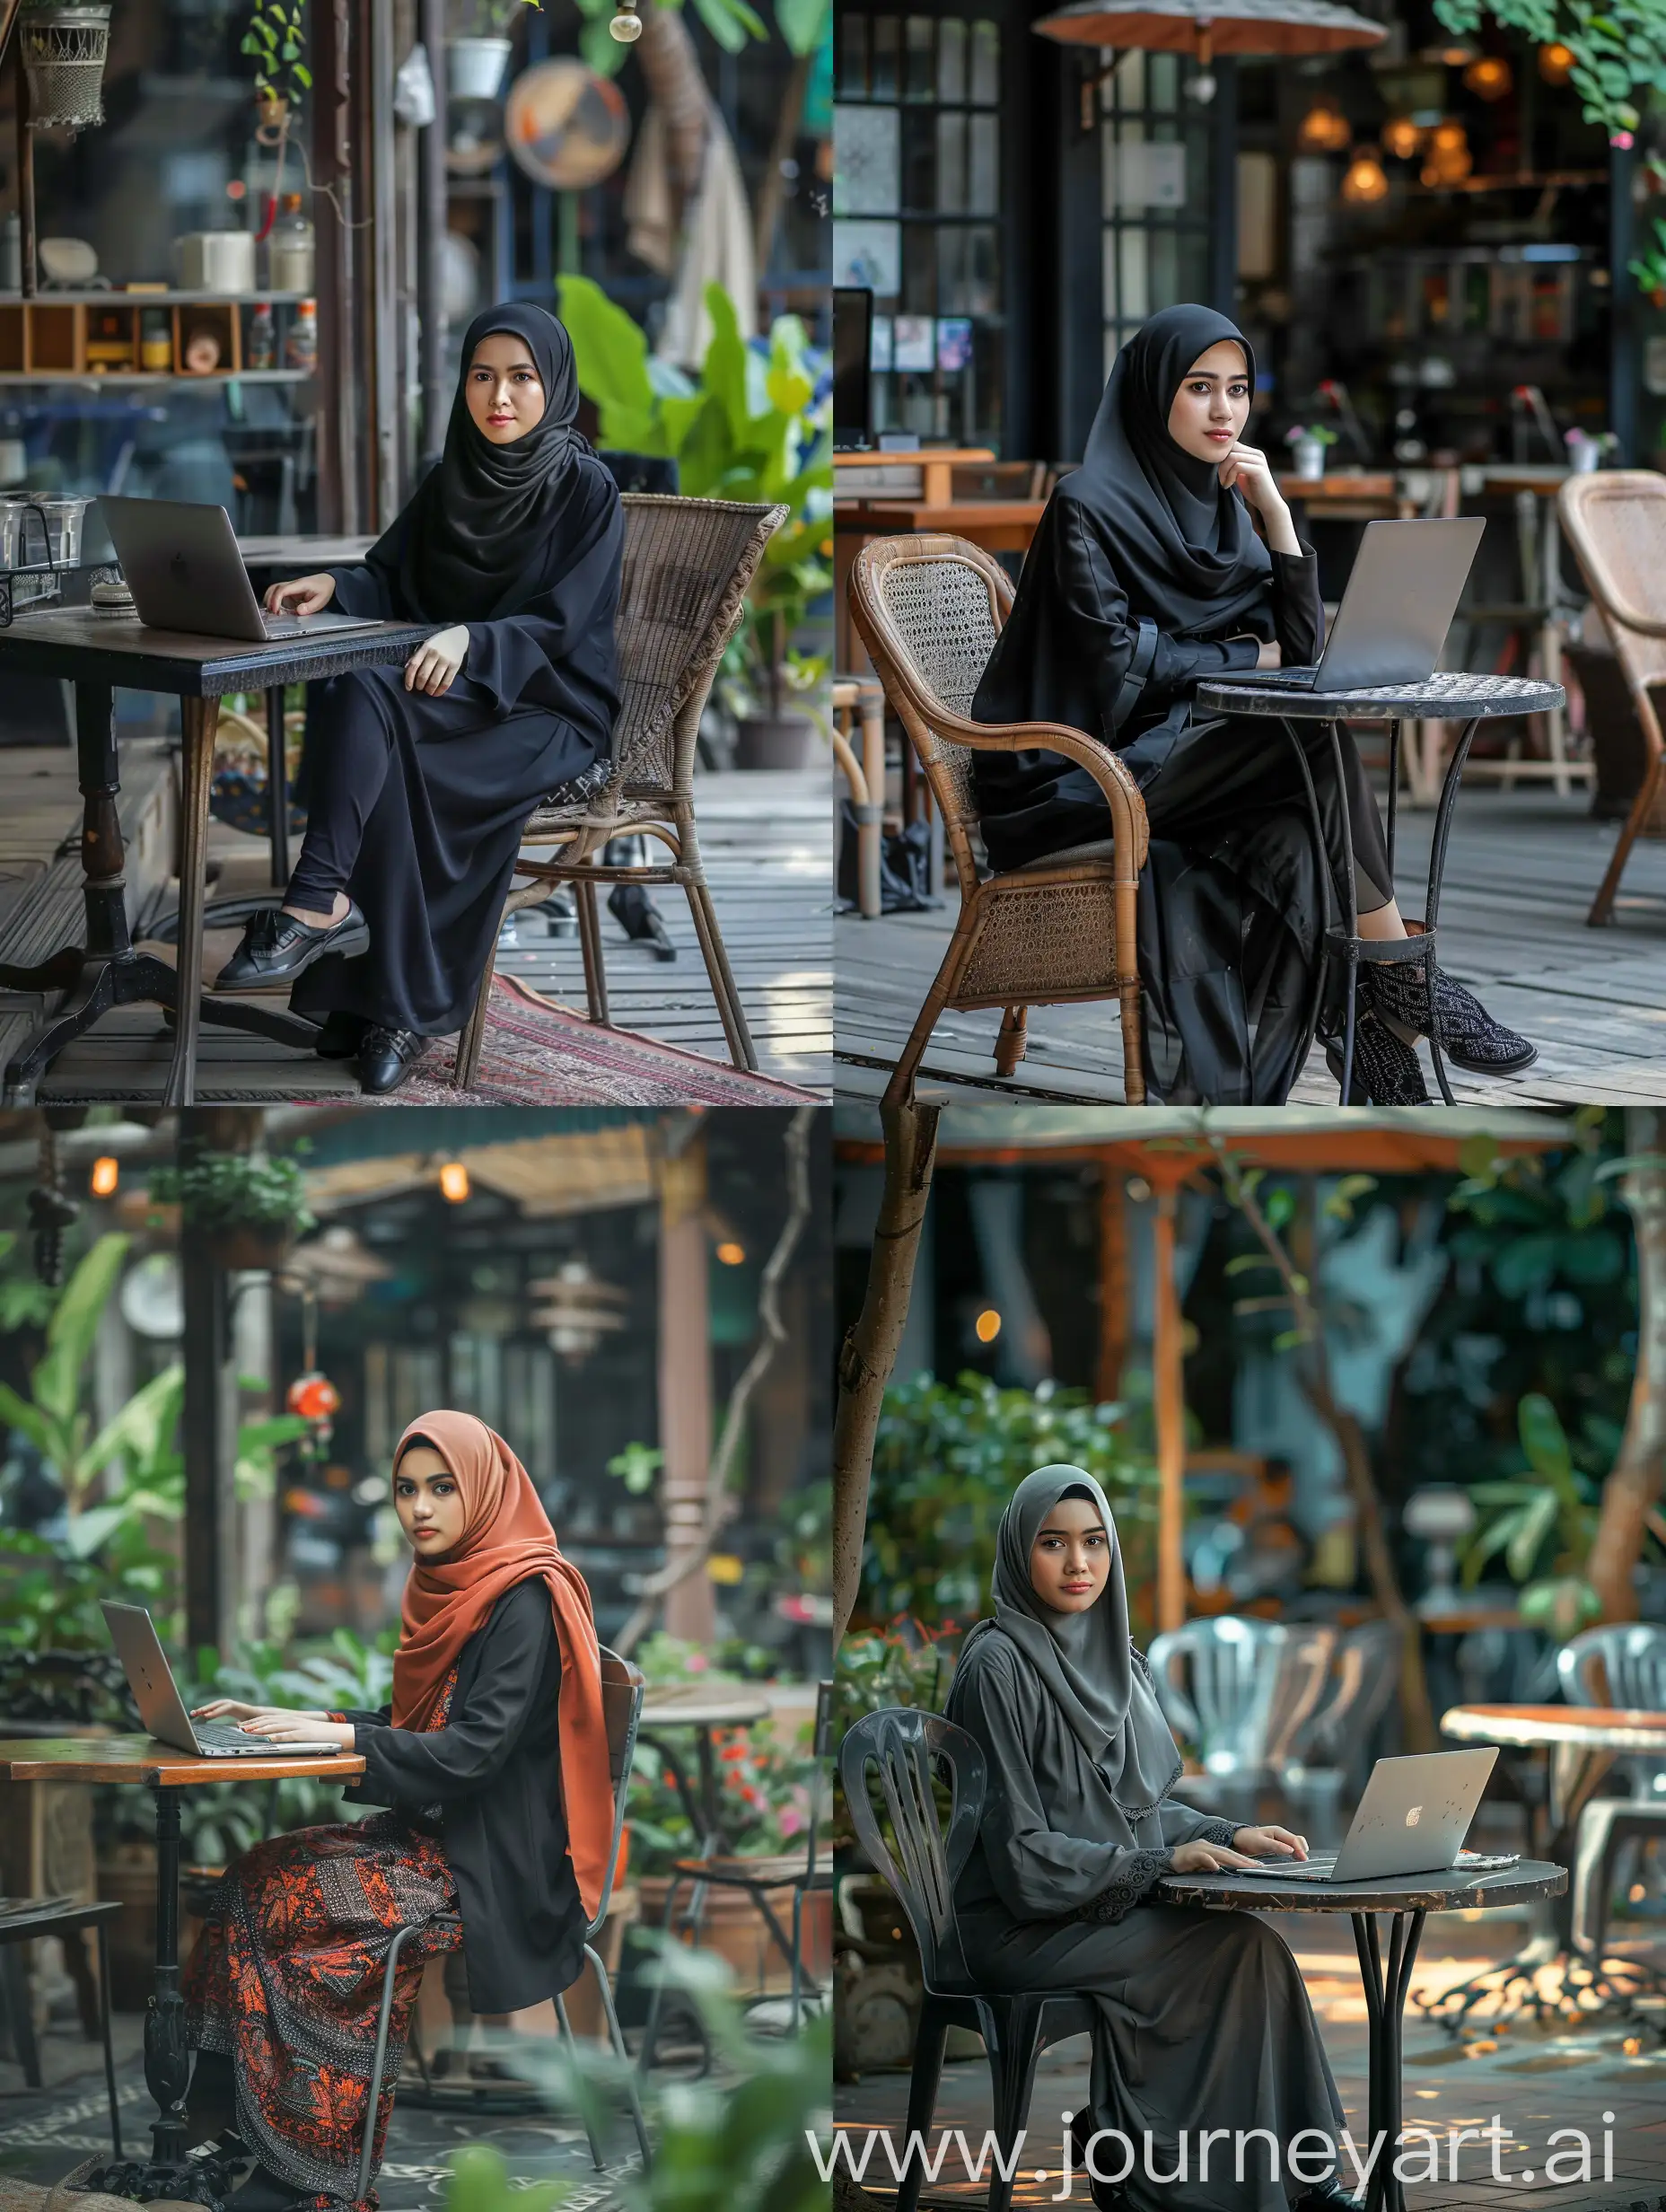 Stylish-Indonesian-Woman-in-Hijab-at-Outdoor-Cafe-with-Laptop